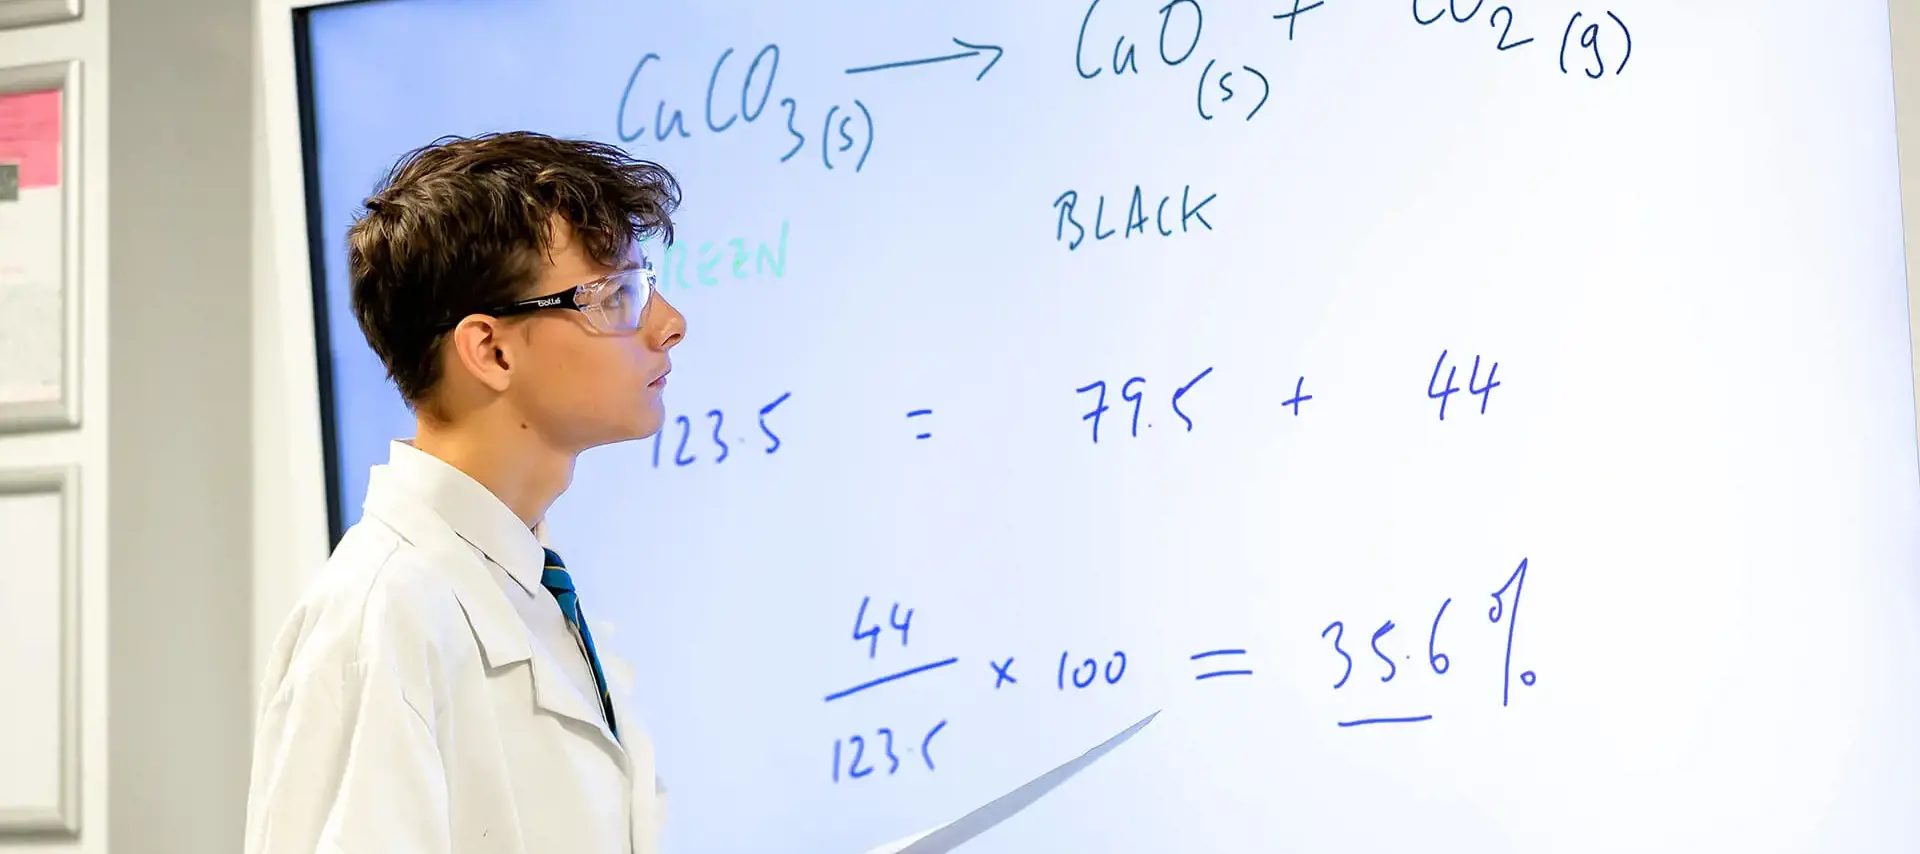 A student at The Gregg School looking at equations on a digital whiteboard